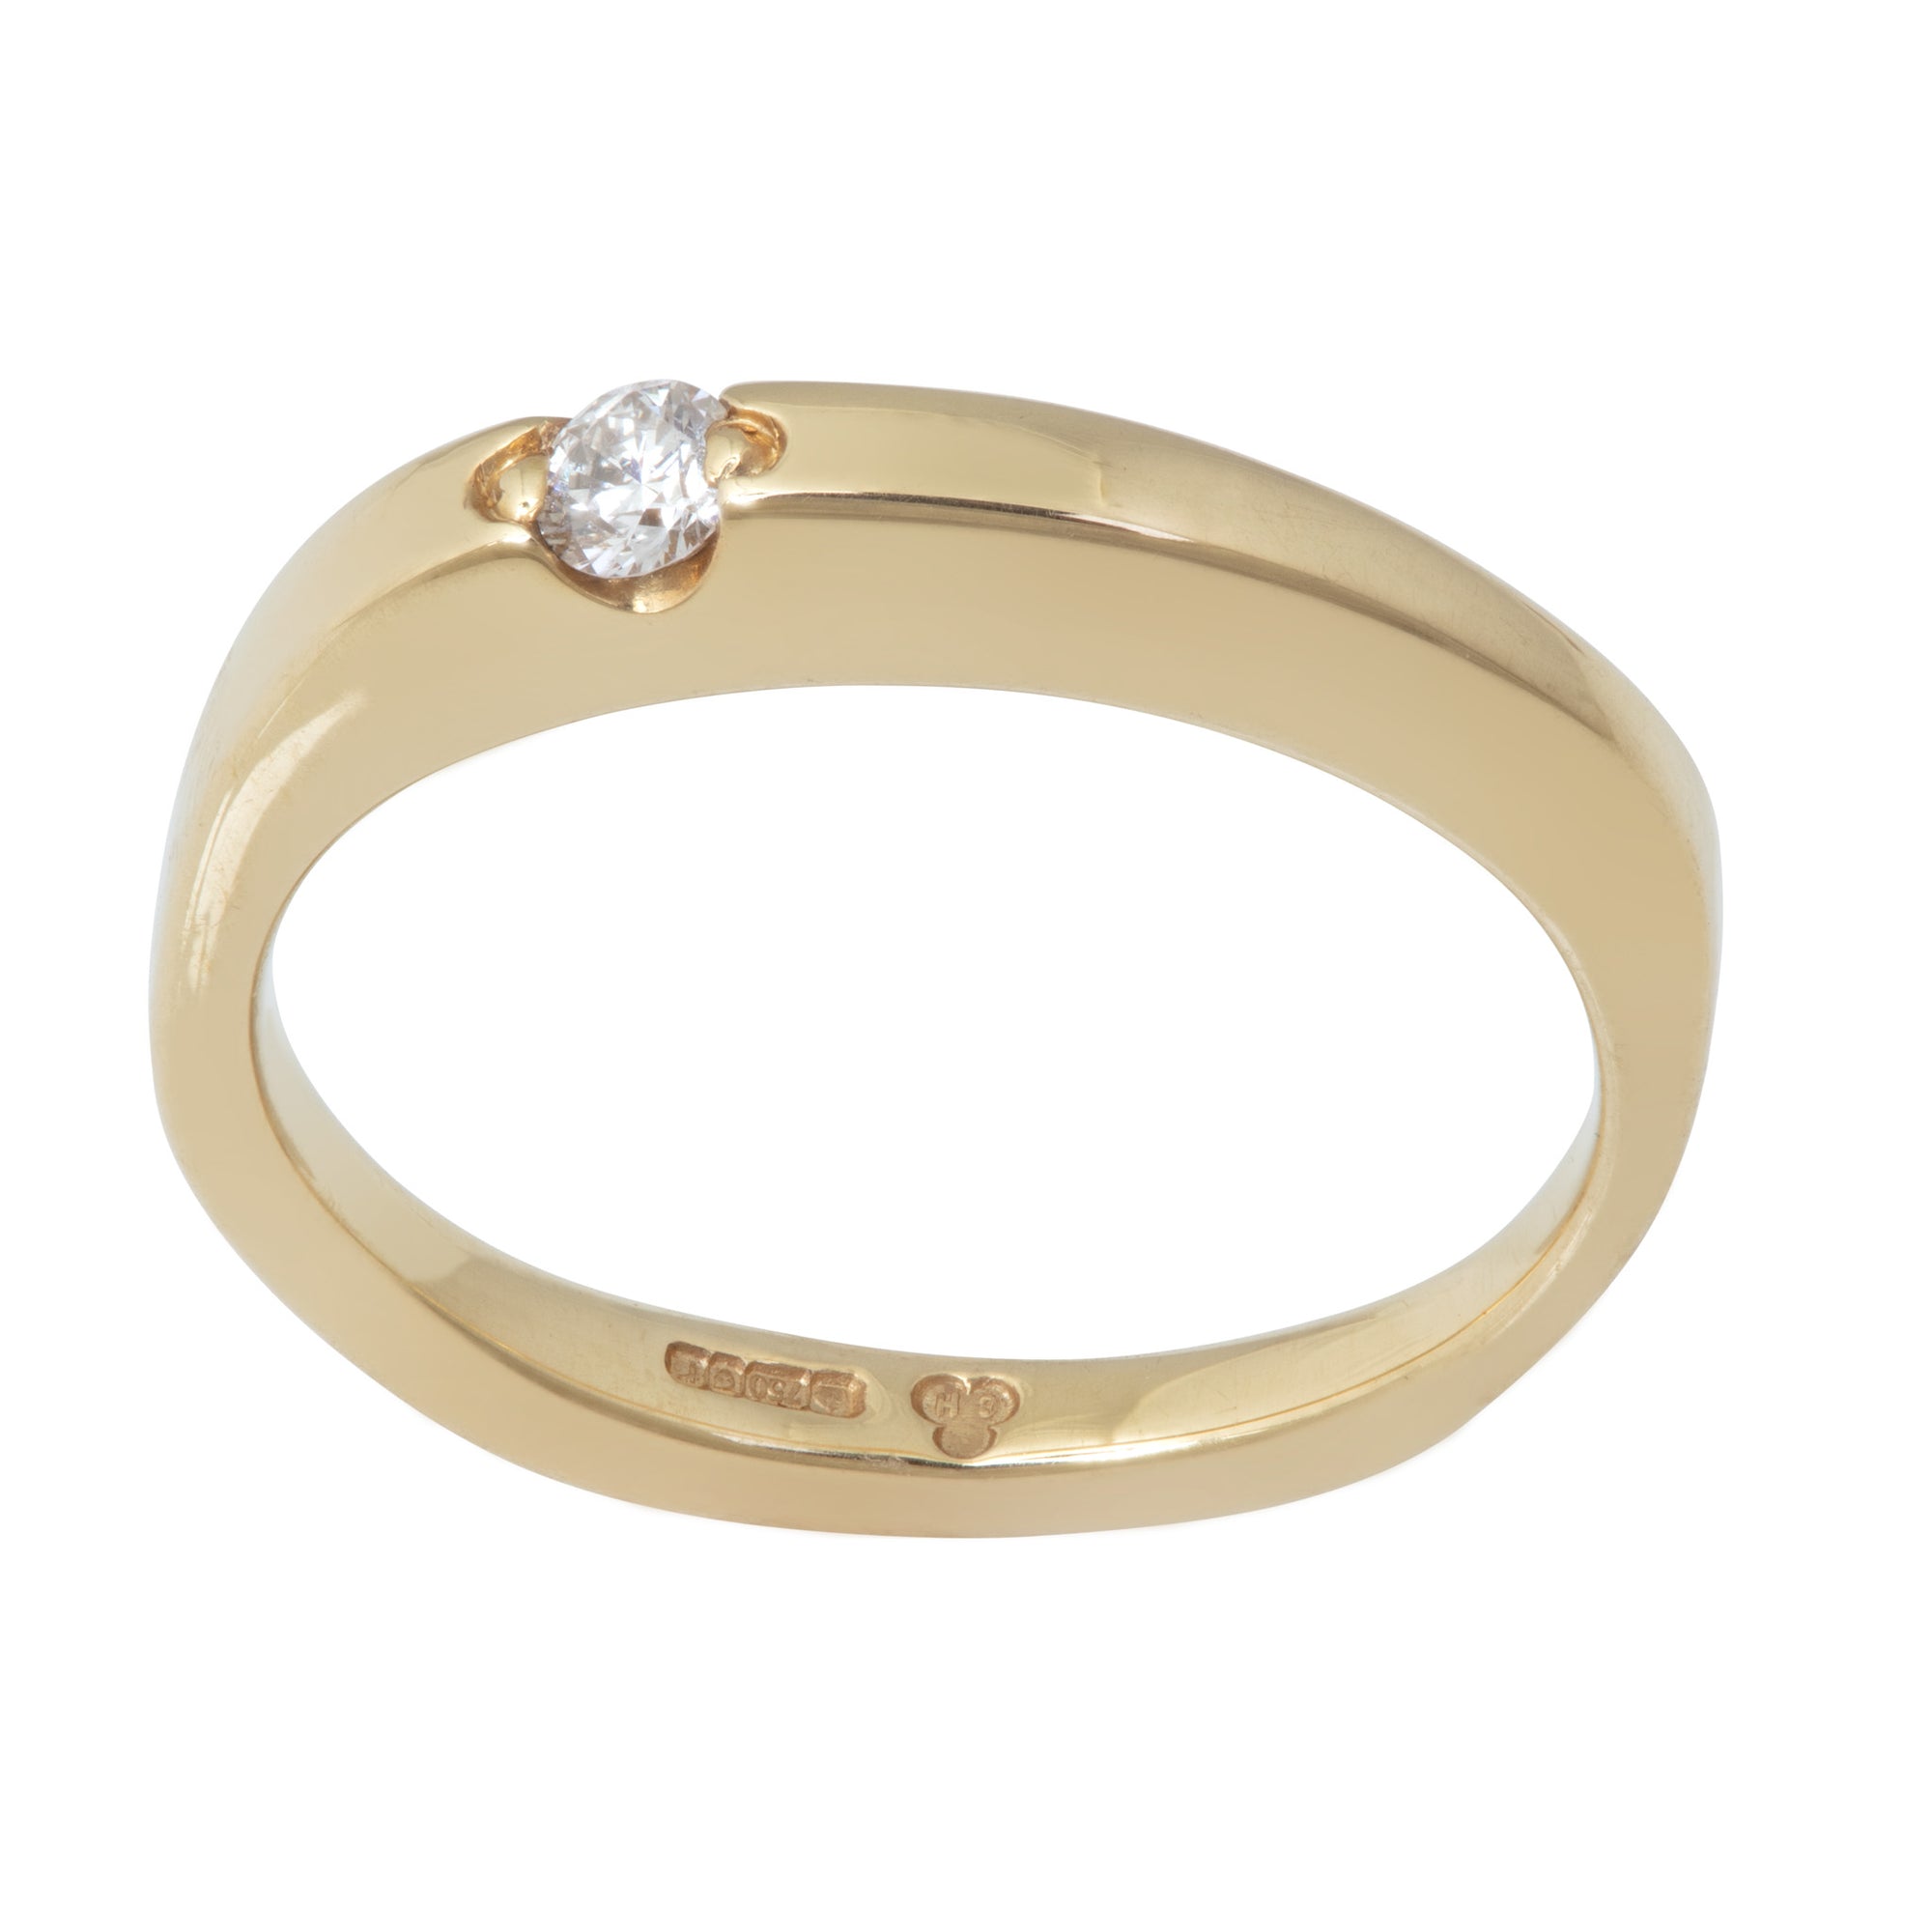 Balaji Jewels Round Yellow Gold Ring- Diamond Ring- 18Ct Gold- Jali Pattern  Cocktail Ring, Weight: 3 Gram, Size: 6 To 18 at Rs 50000 in Surat